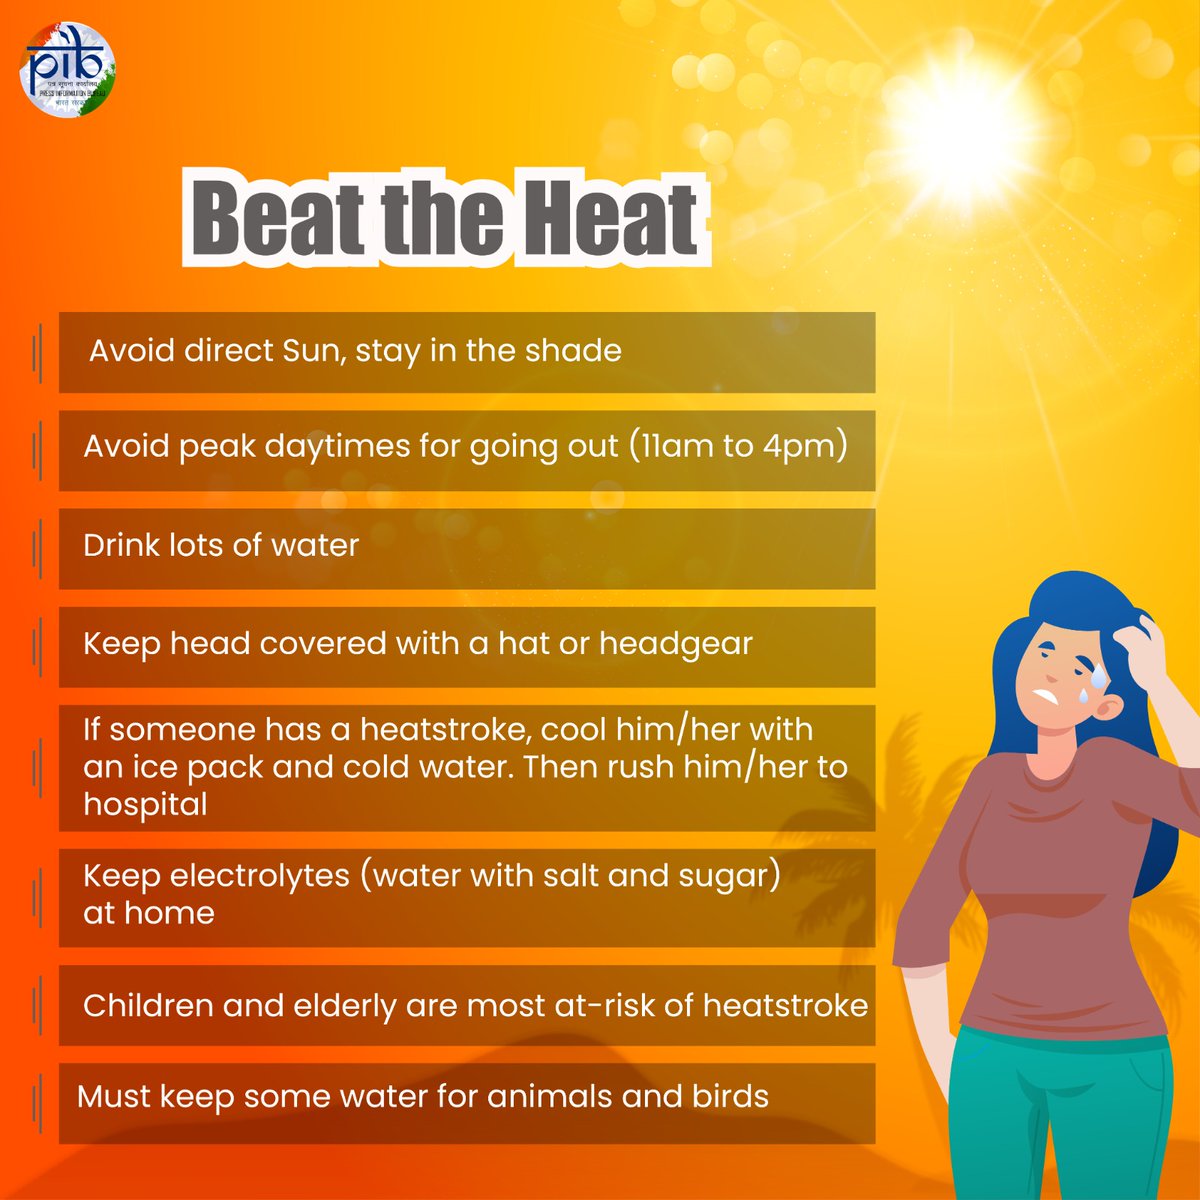 #BeatTheHeat with simple measures during this summer season!

🔹Avoid direct sun, stay in the shade
🔹Avoid peak daytimes for going out (11am to 4pm)
🔹Drink lots of water

#HeatWave